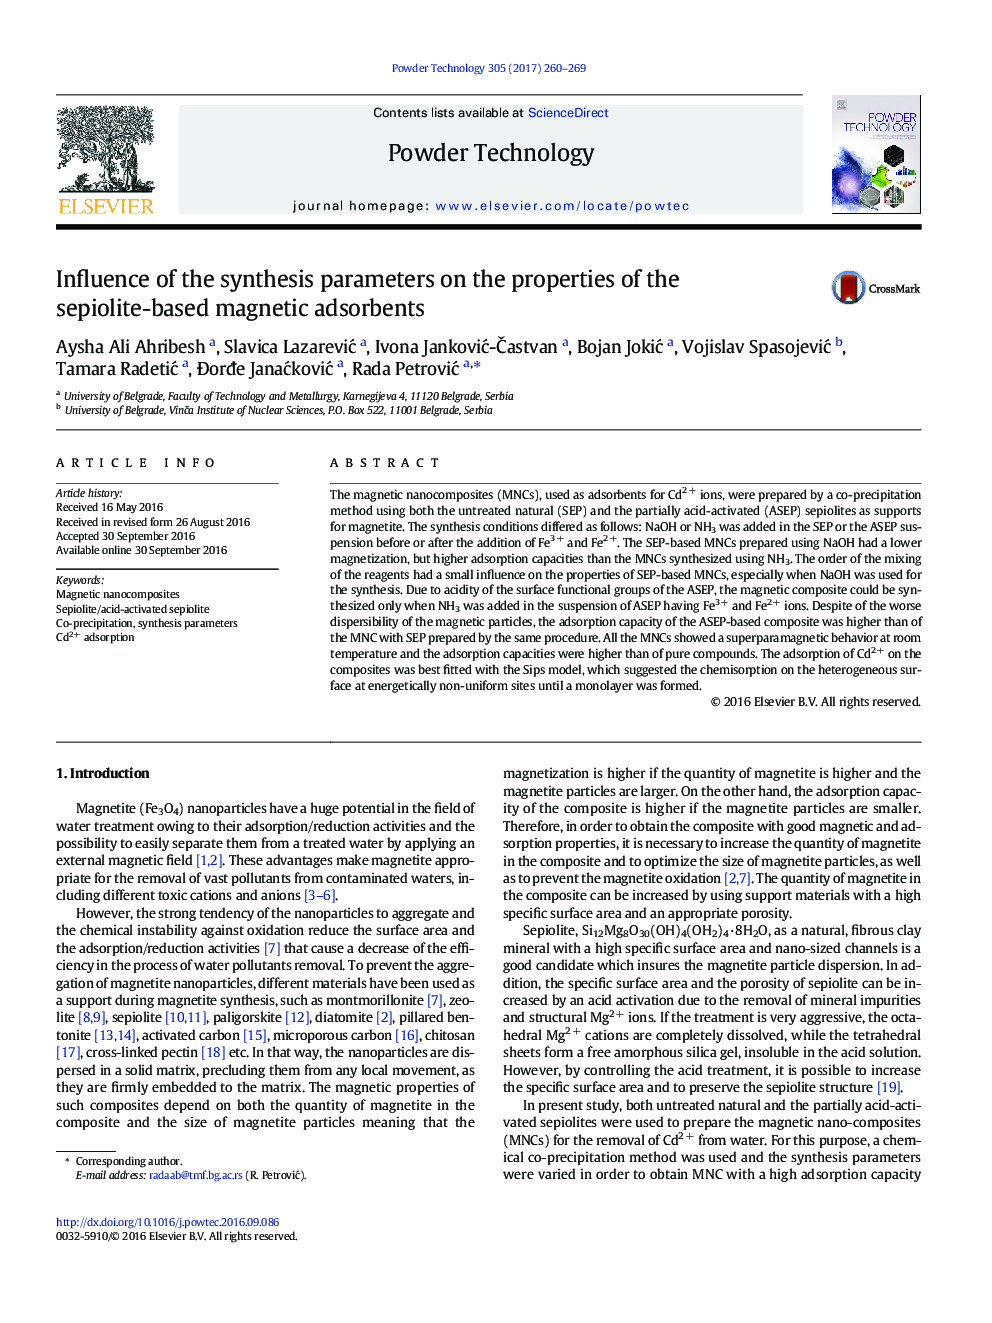 Influence of the synthesis parameters on the properties of the sepiolite-based magnetic adsorbents